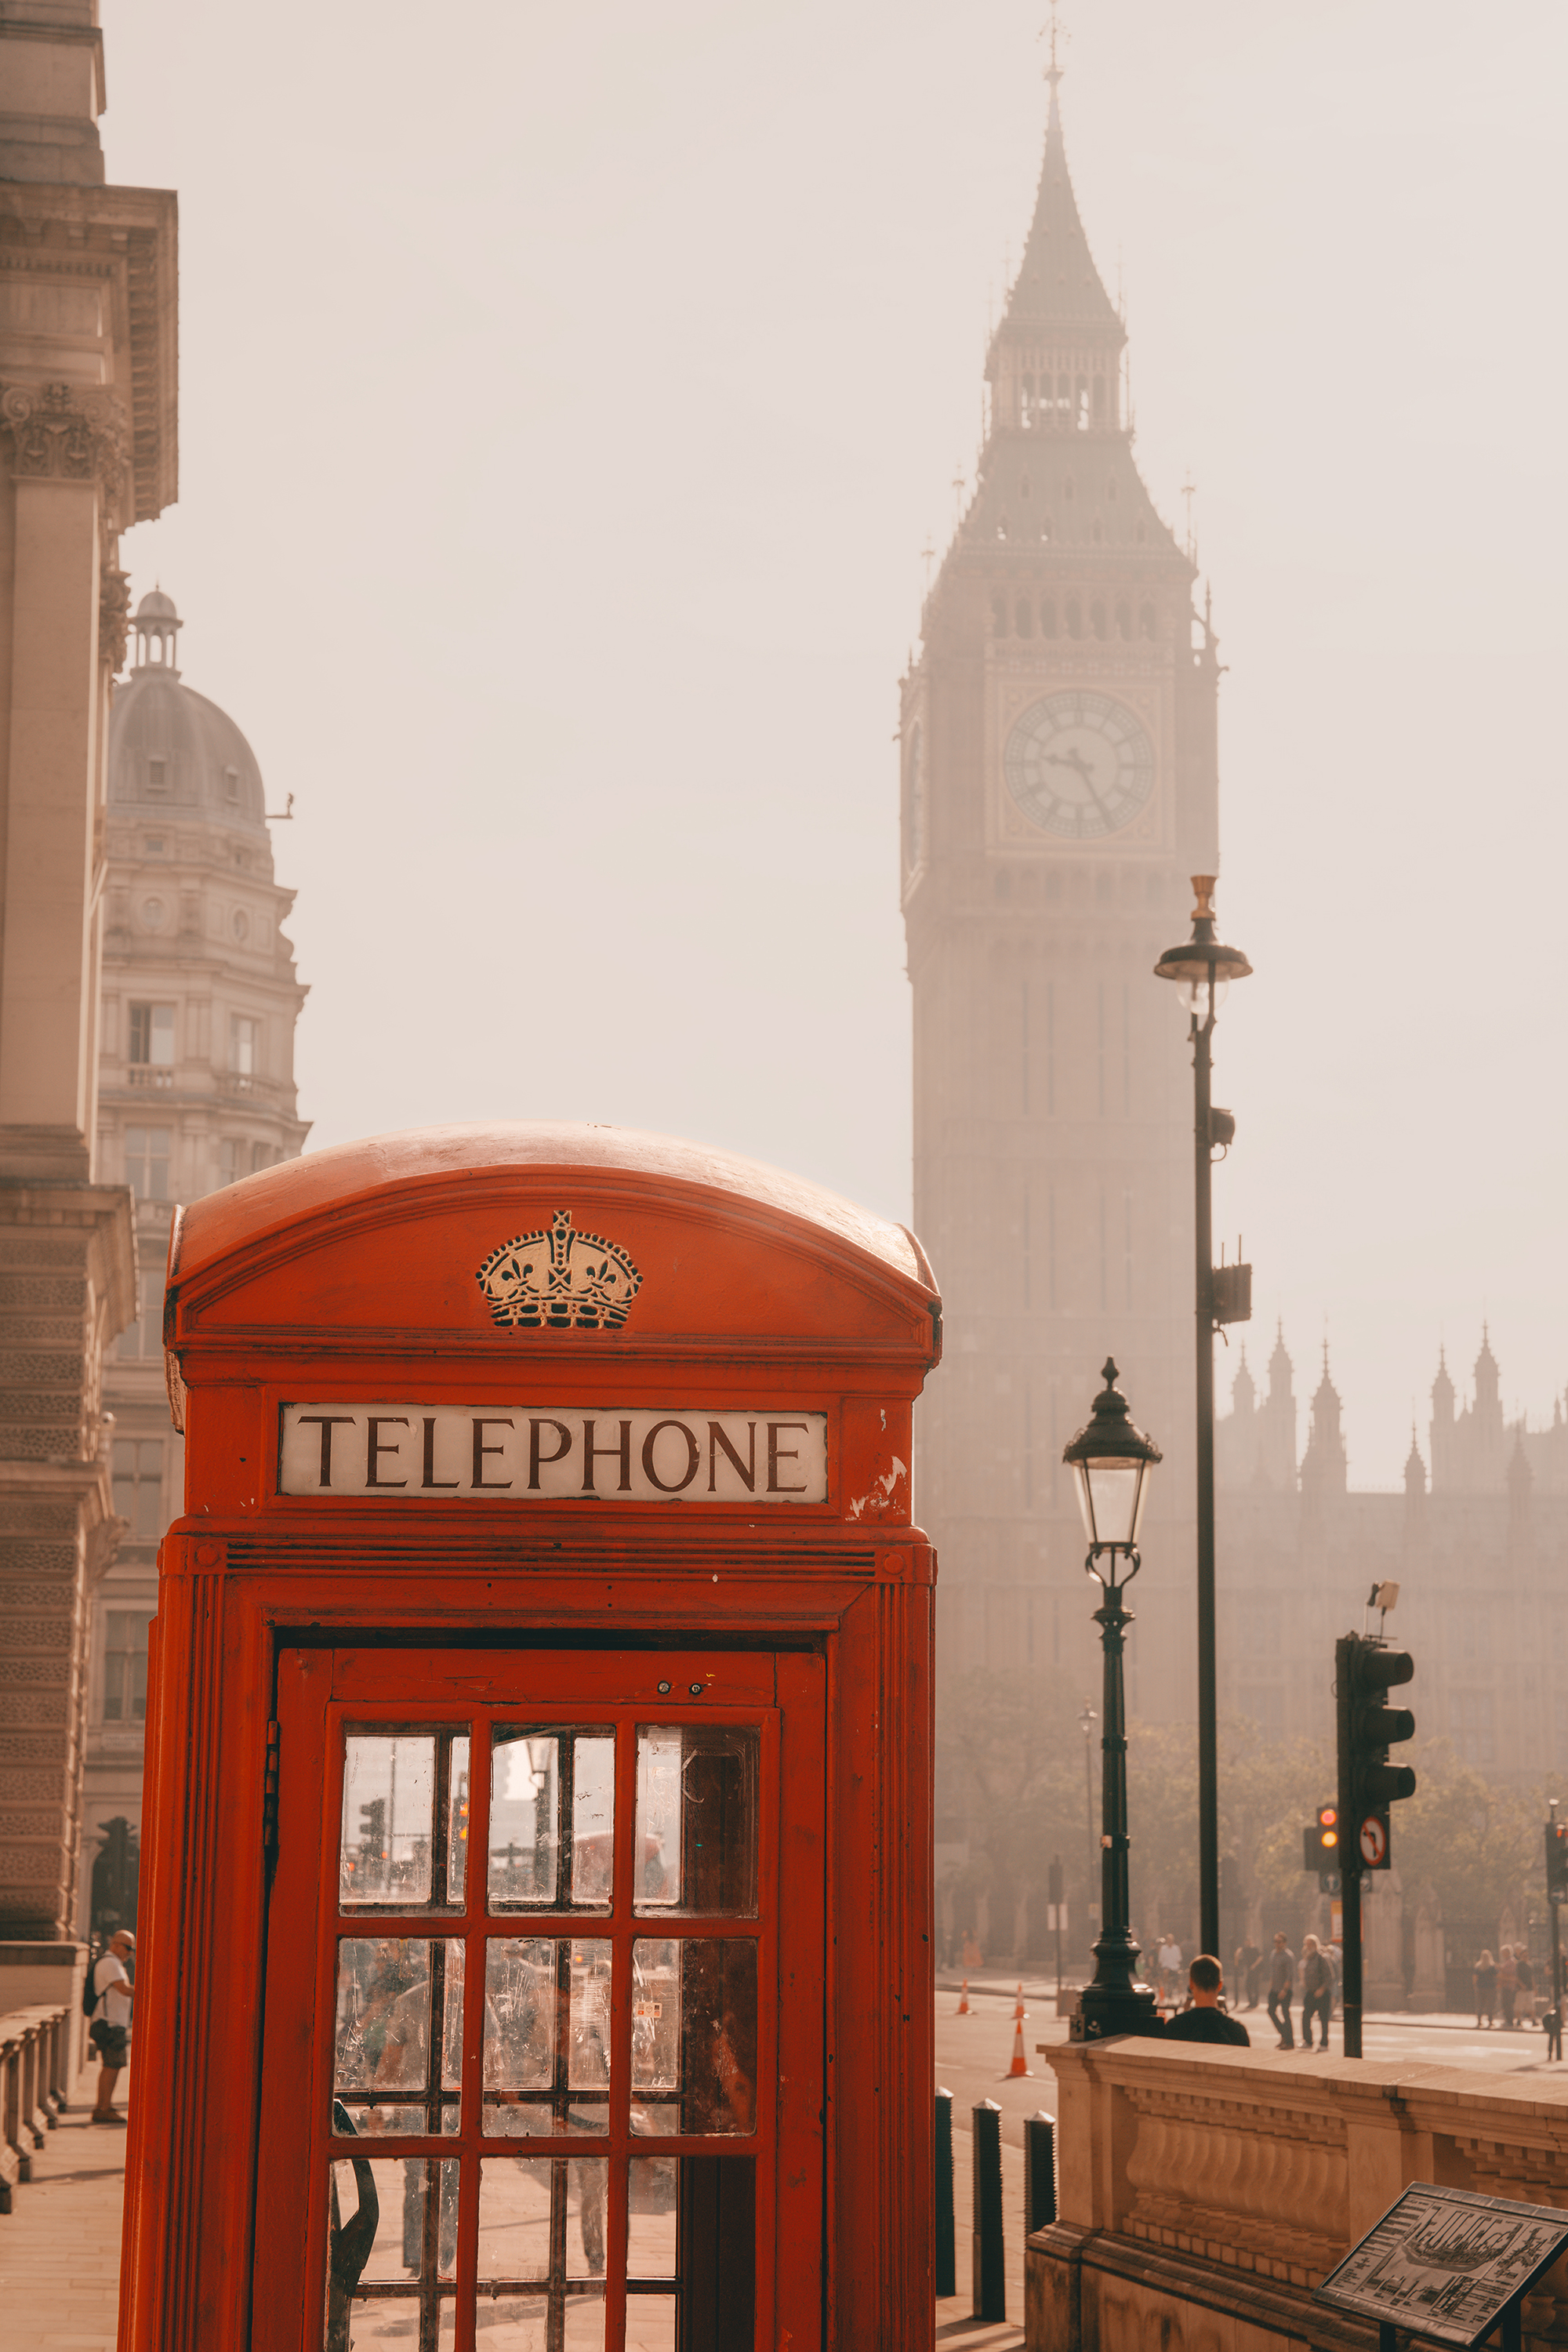 Red telephone booth with Big Ben in background